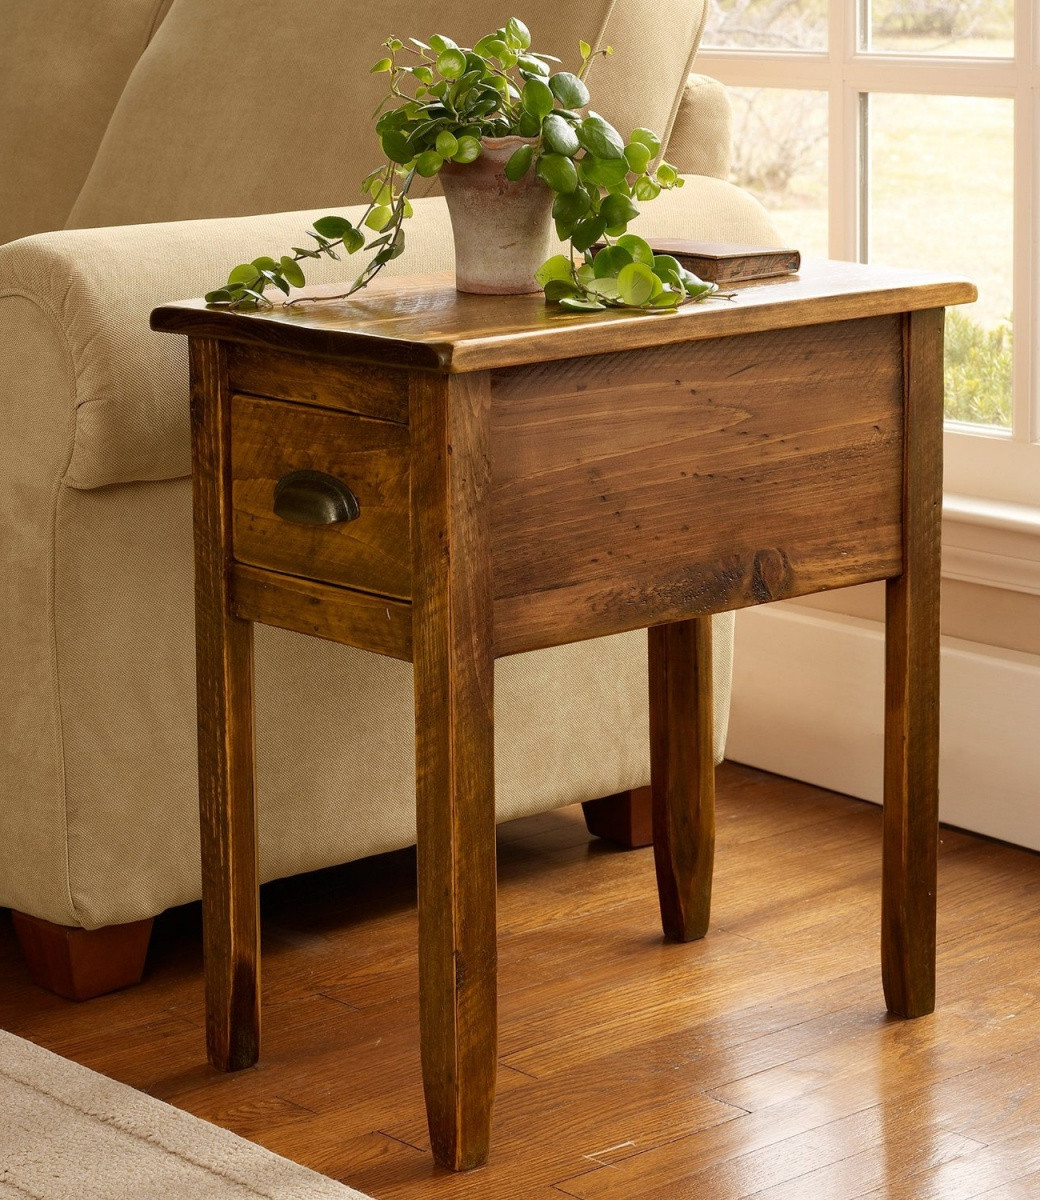 End Tables Living Room
 Side Tables for Living Room Ideas for Small Spaces